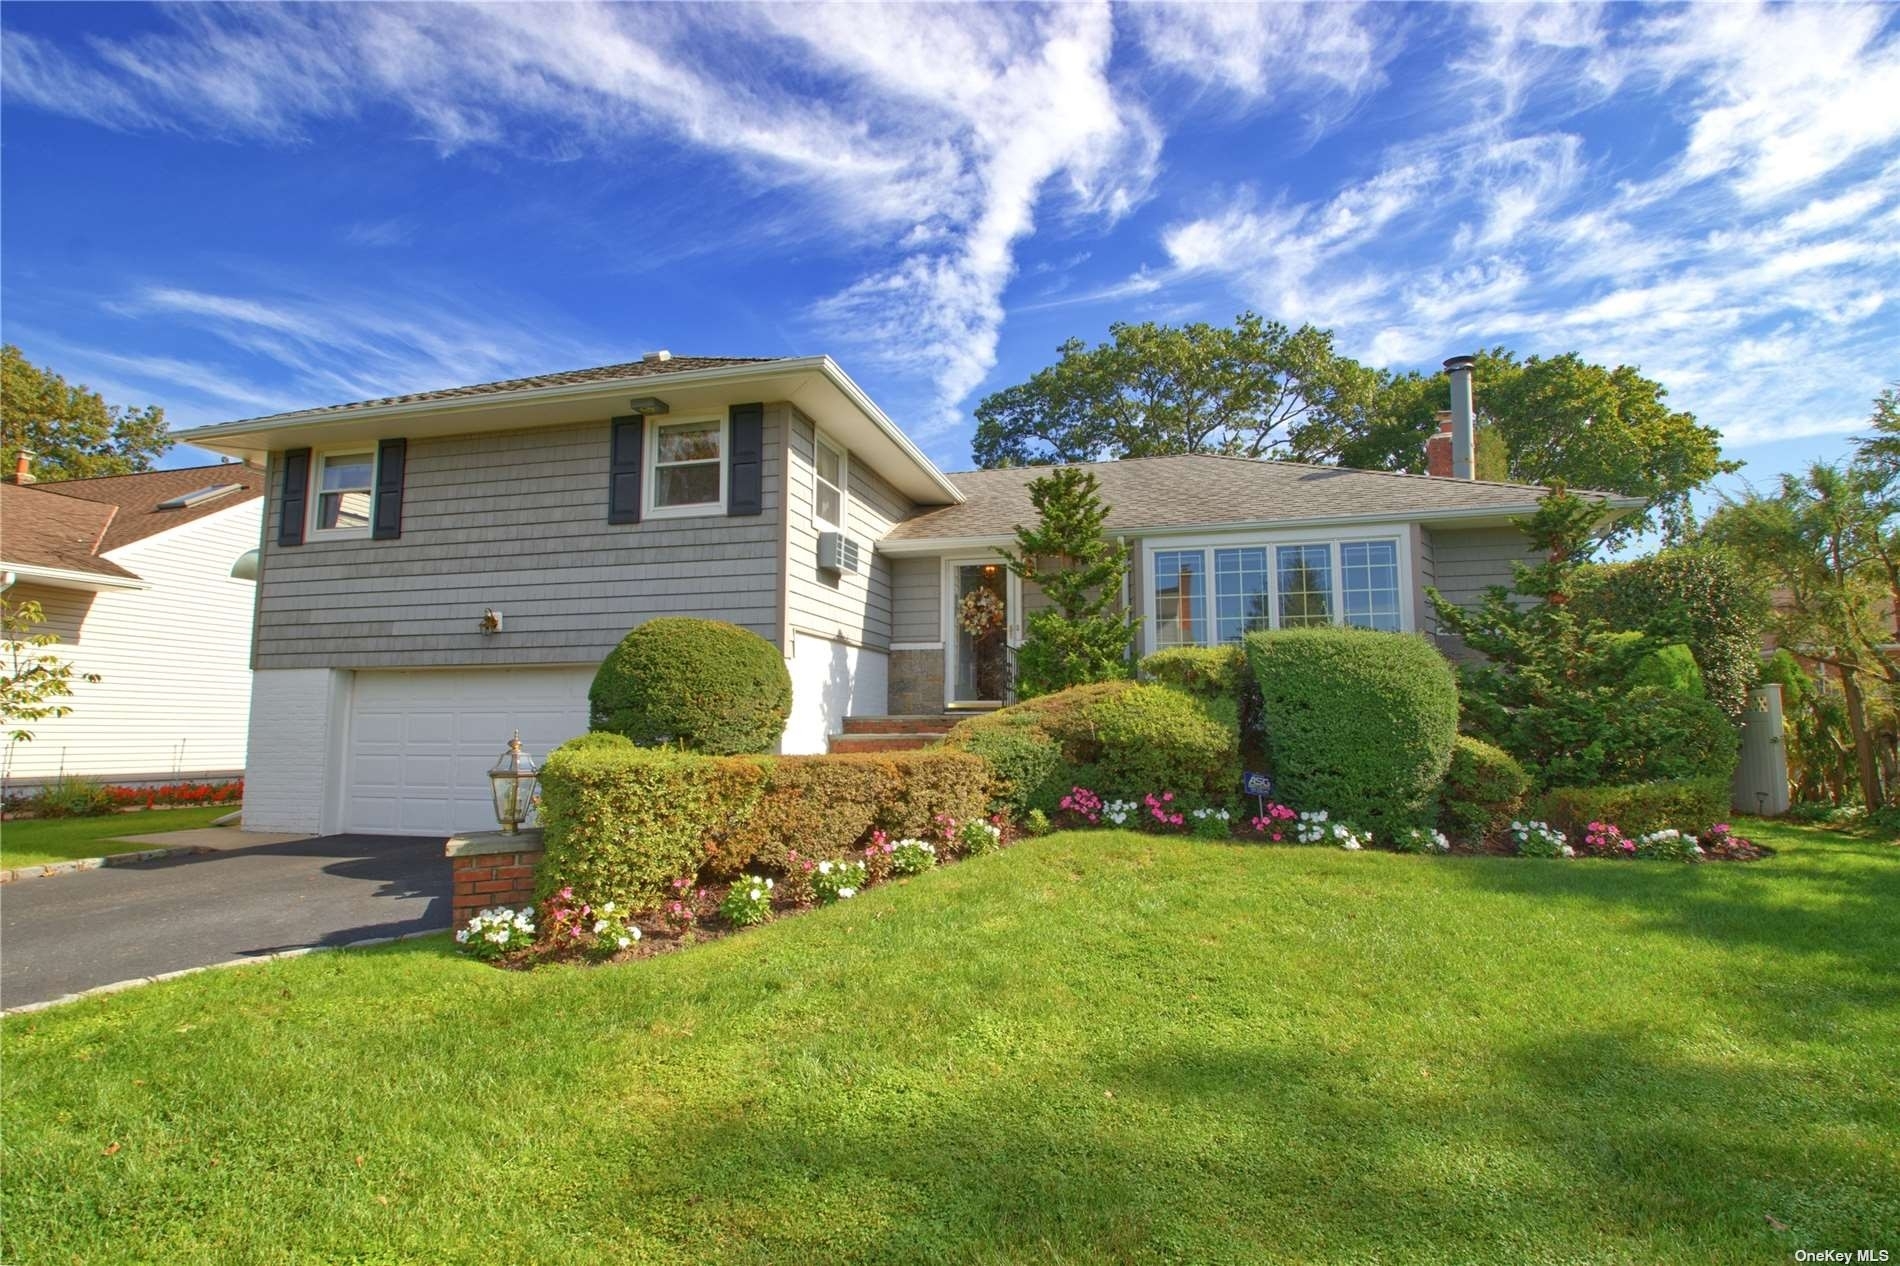 Single Family Home at Syosset